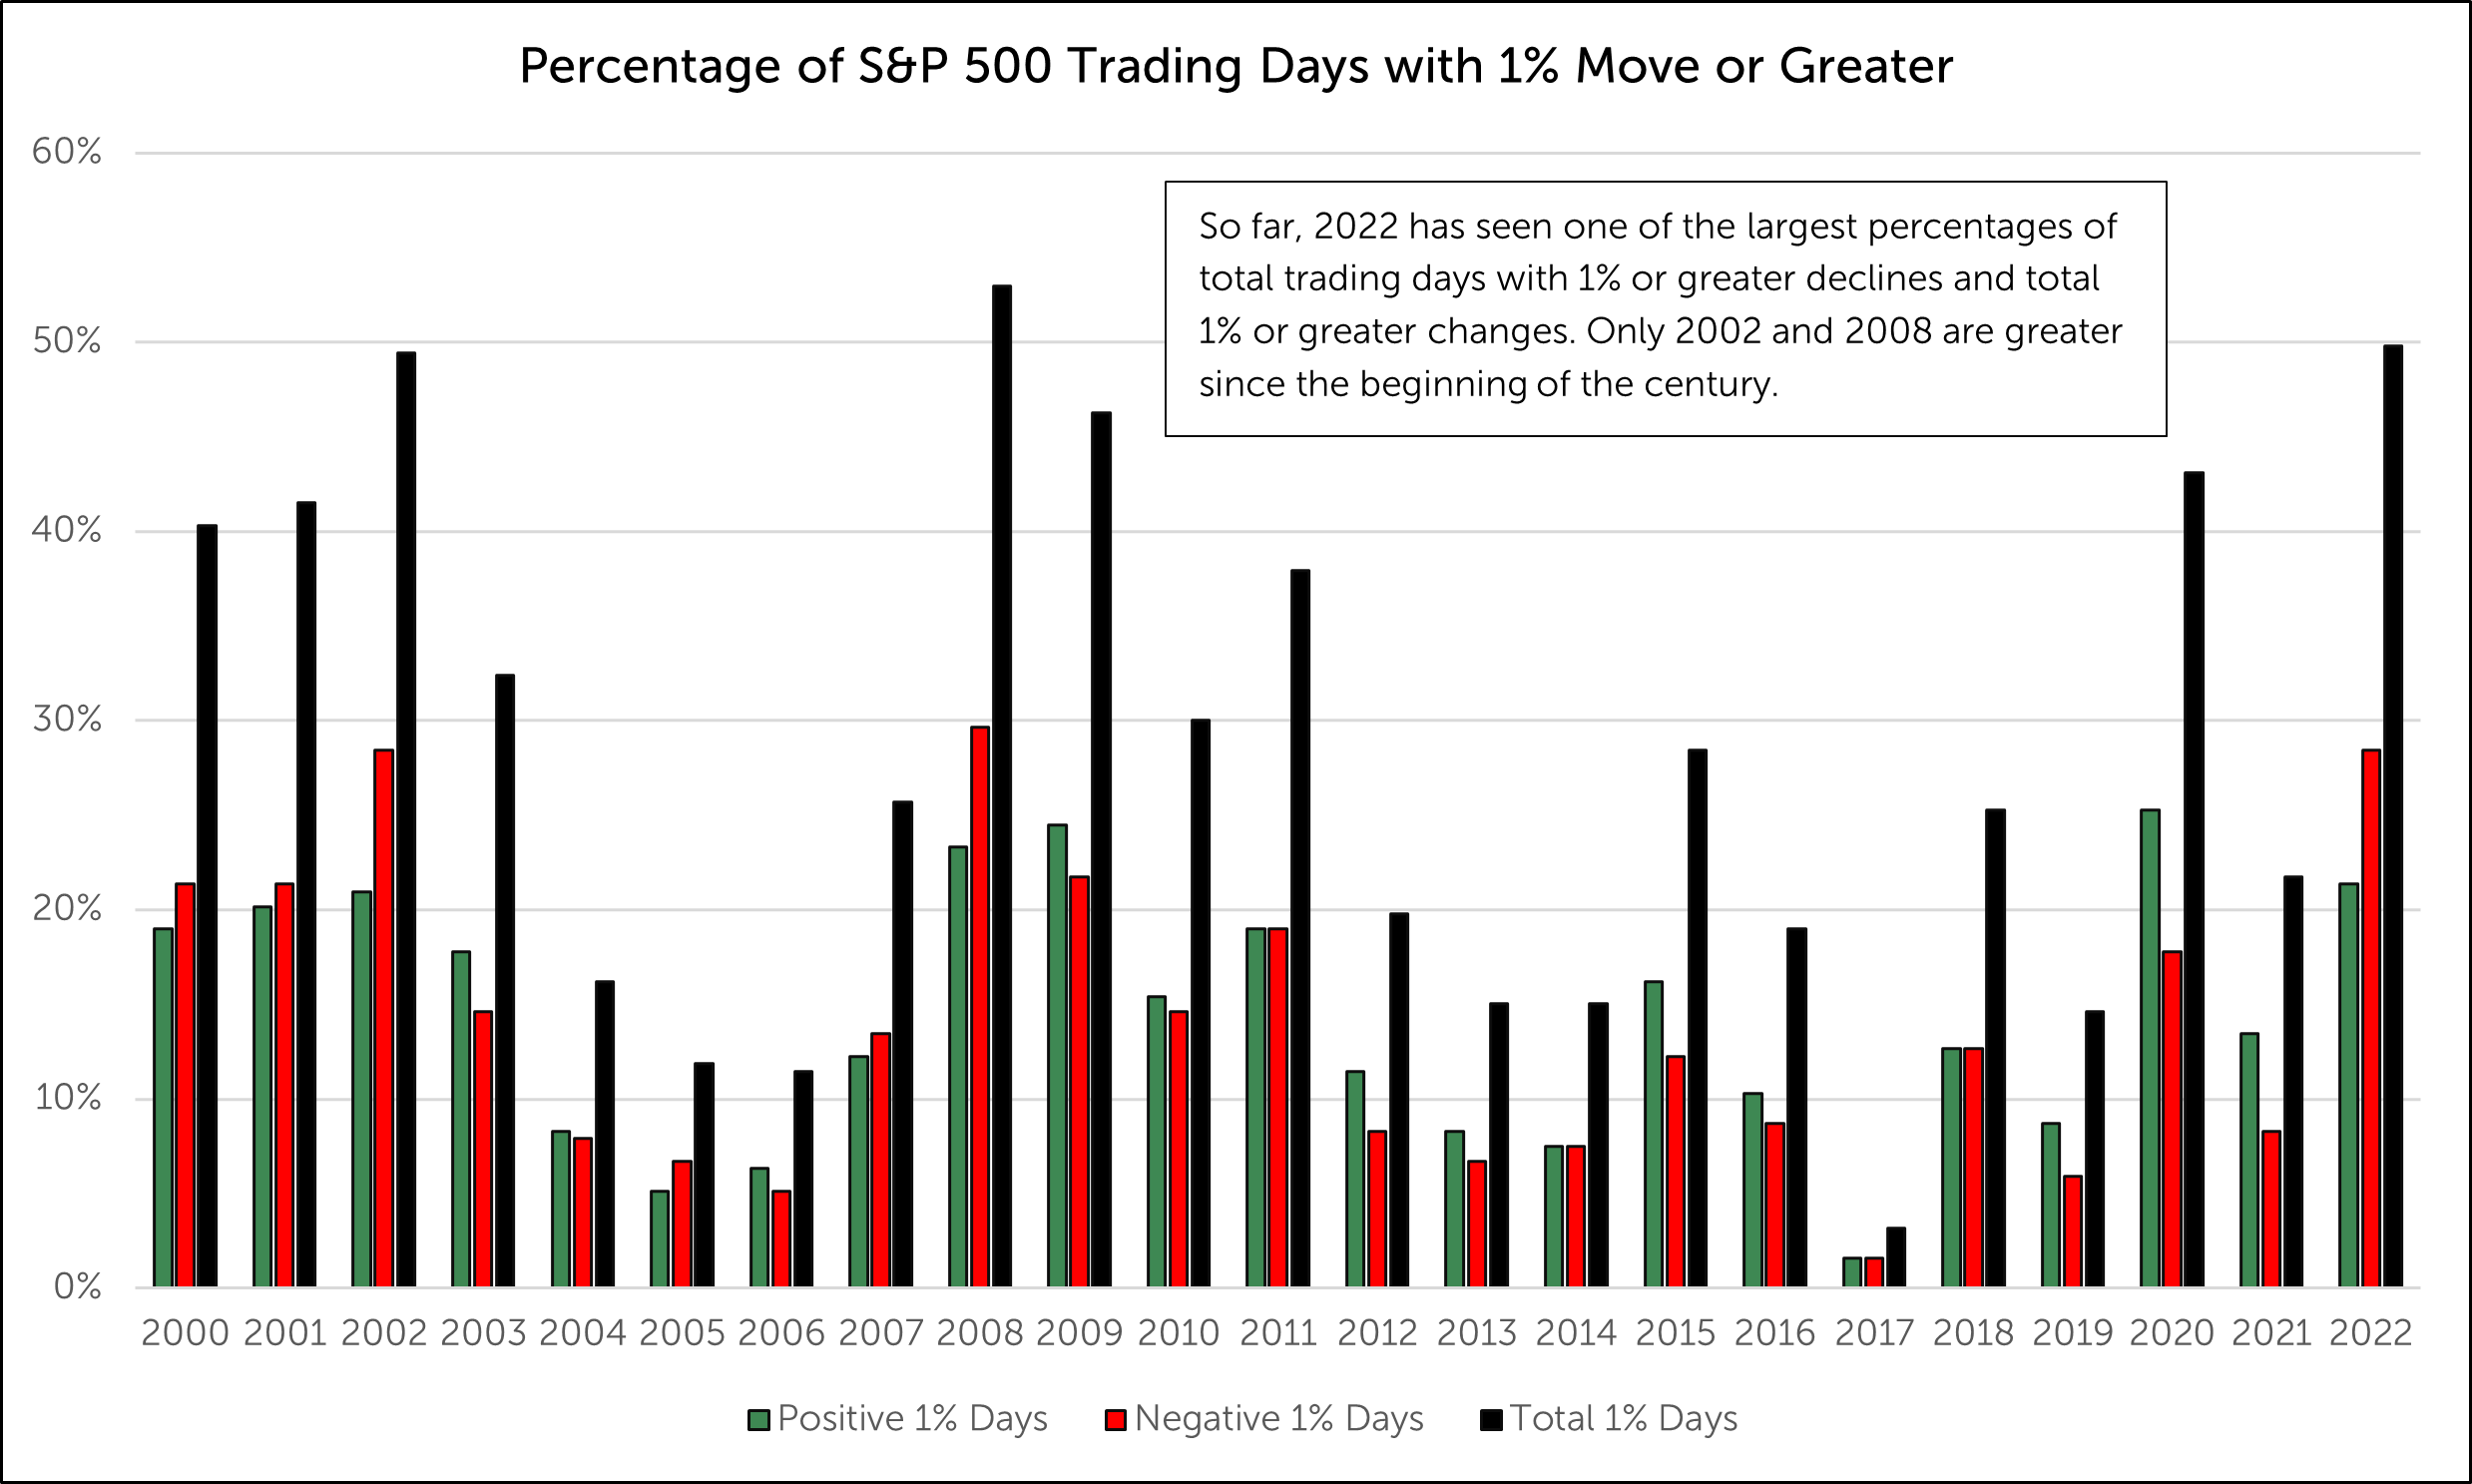 Bar graph depicting Percentage of S&P 500 Trading Days with 1% Move or Greater